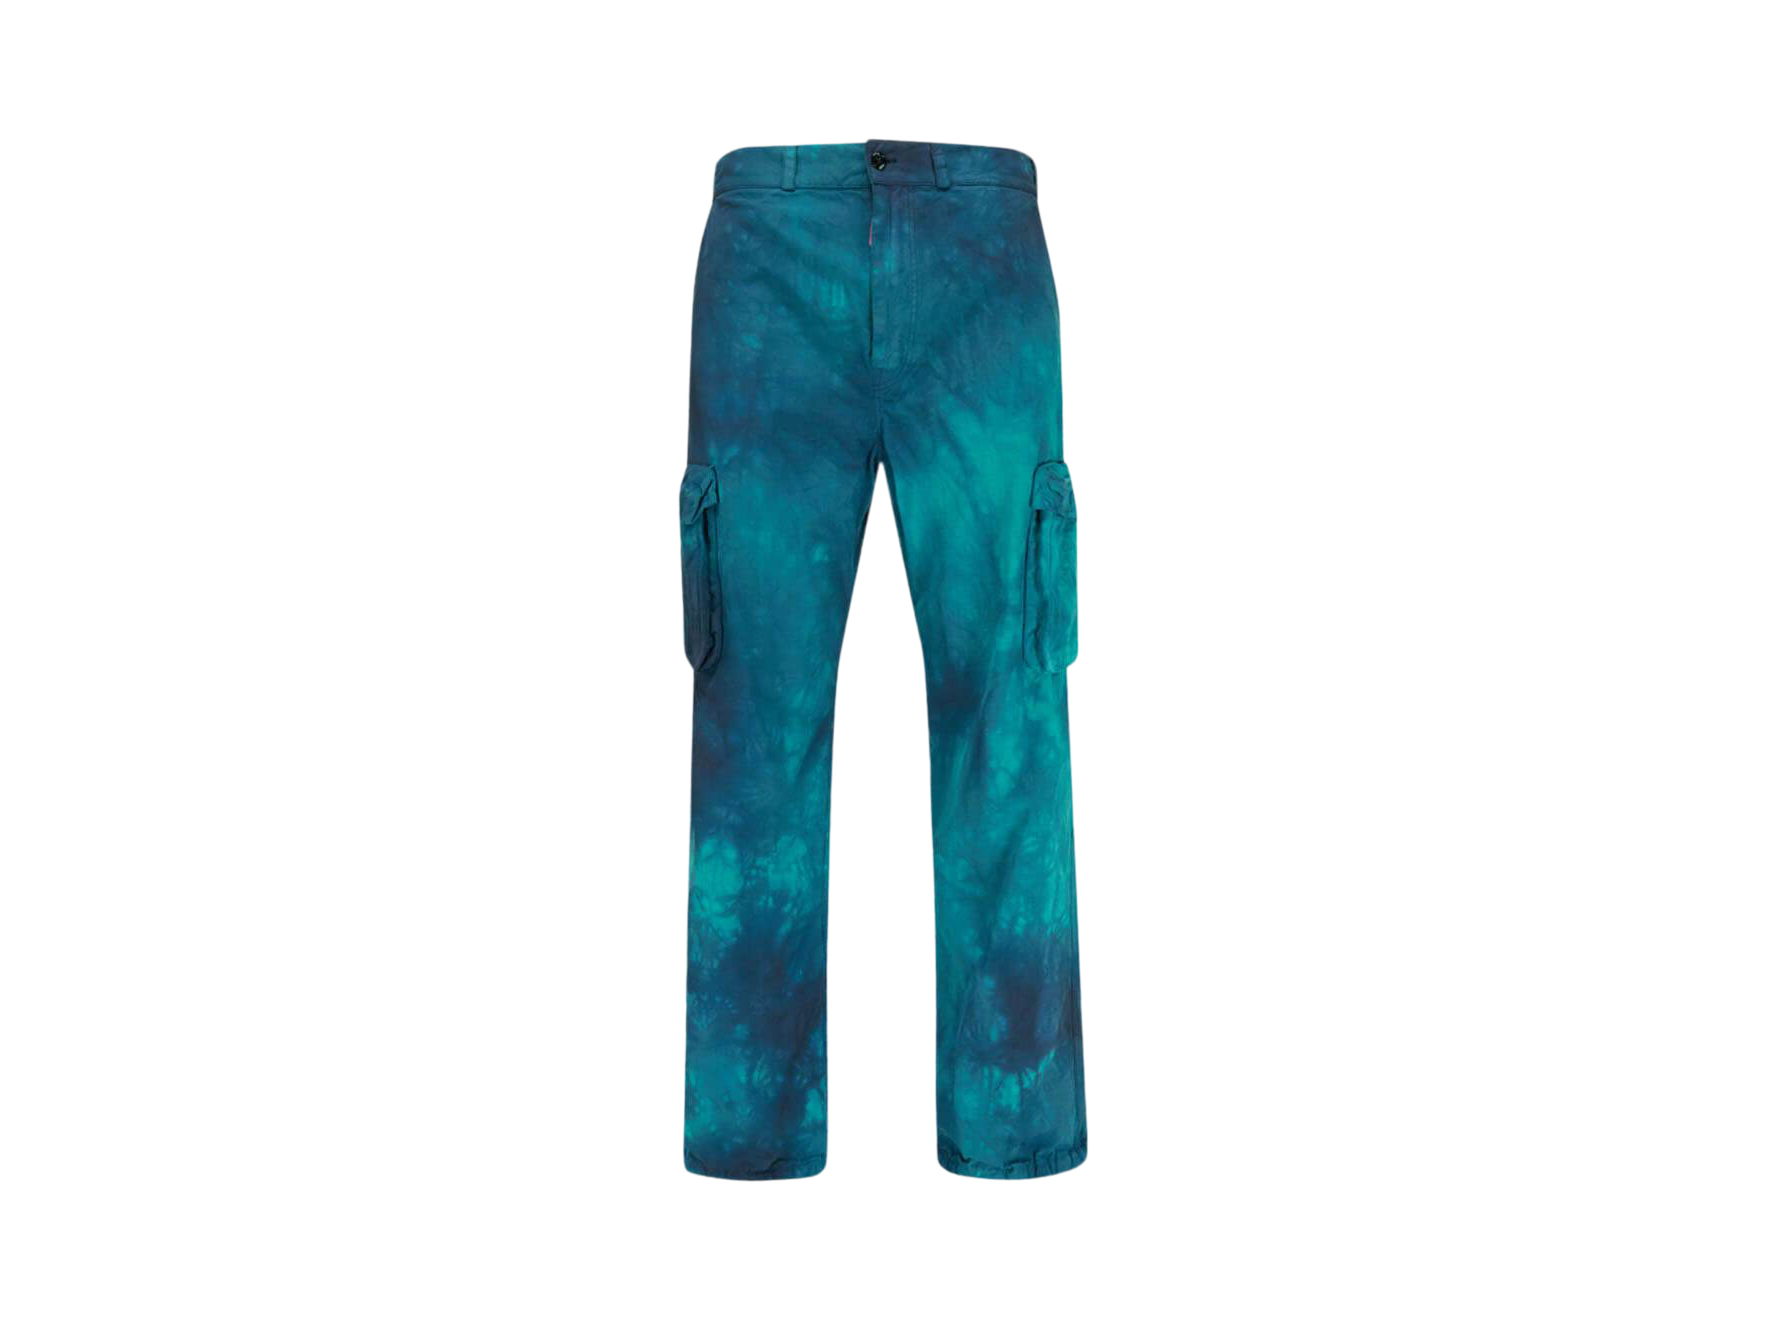 OFF-WHITE Ripstop Tie-Dye Cargo Pants Blue/Multicolor - SS20 - US